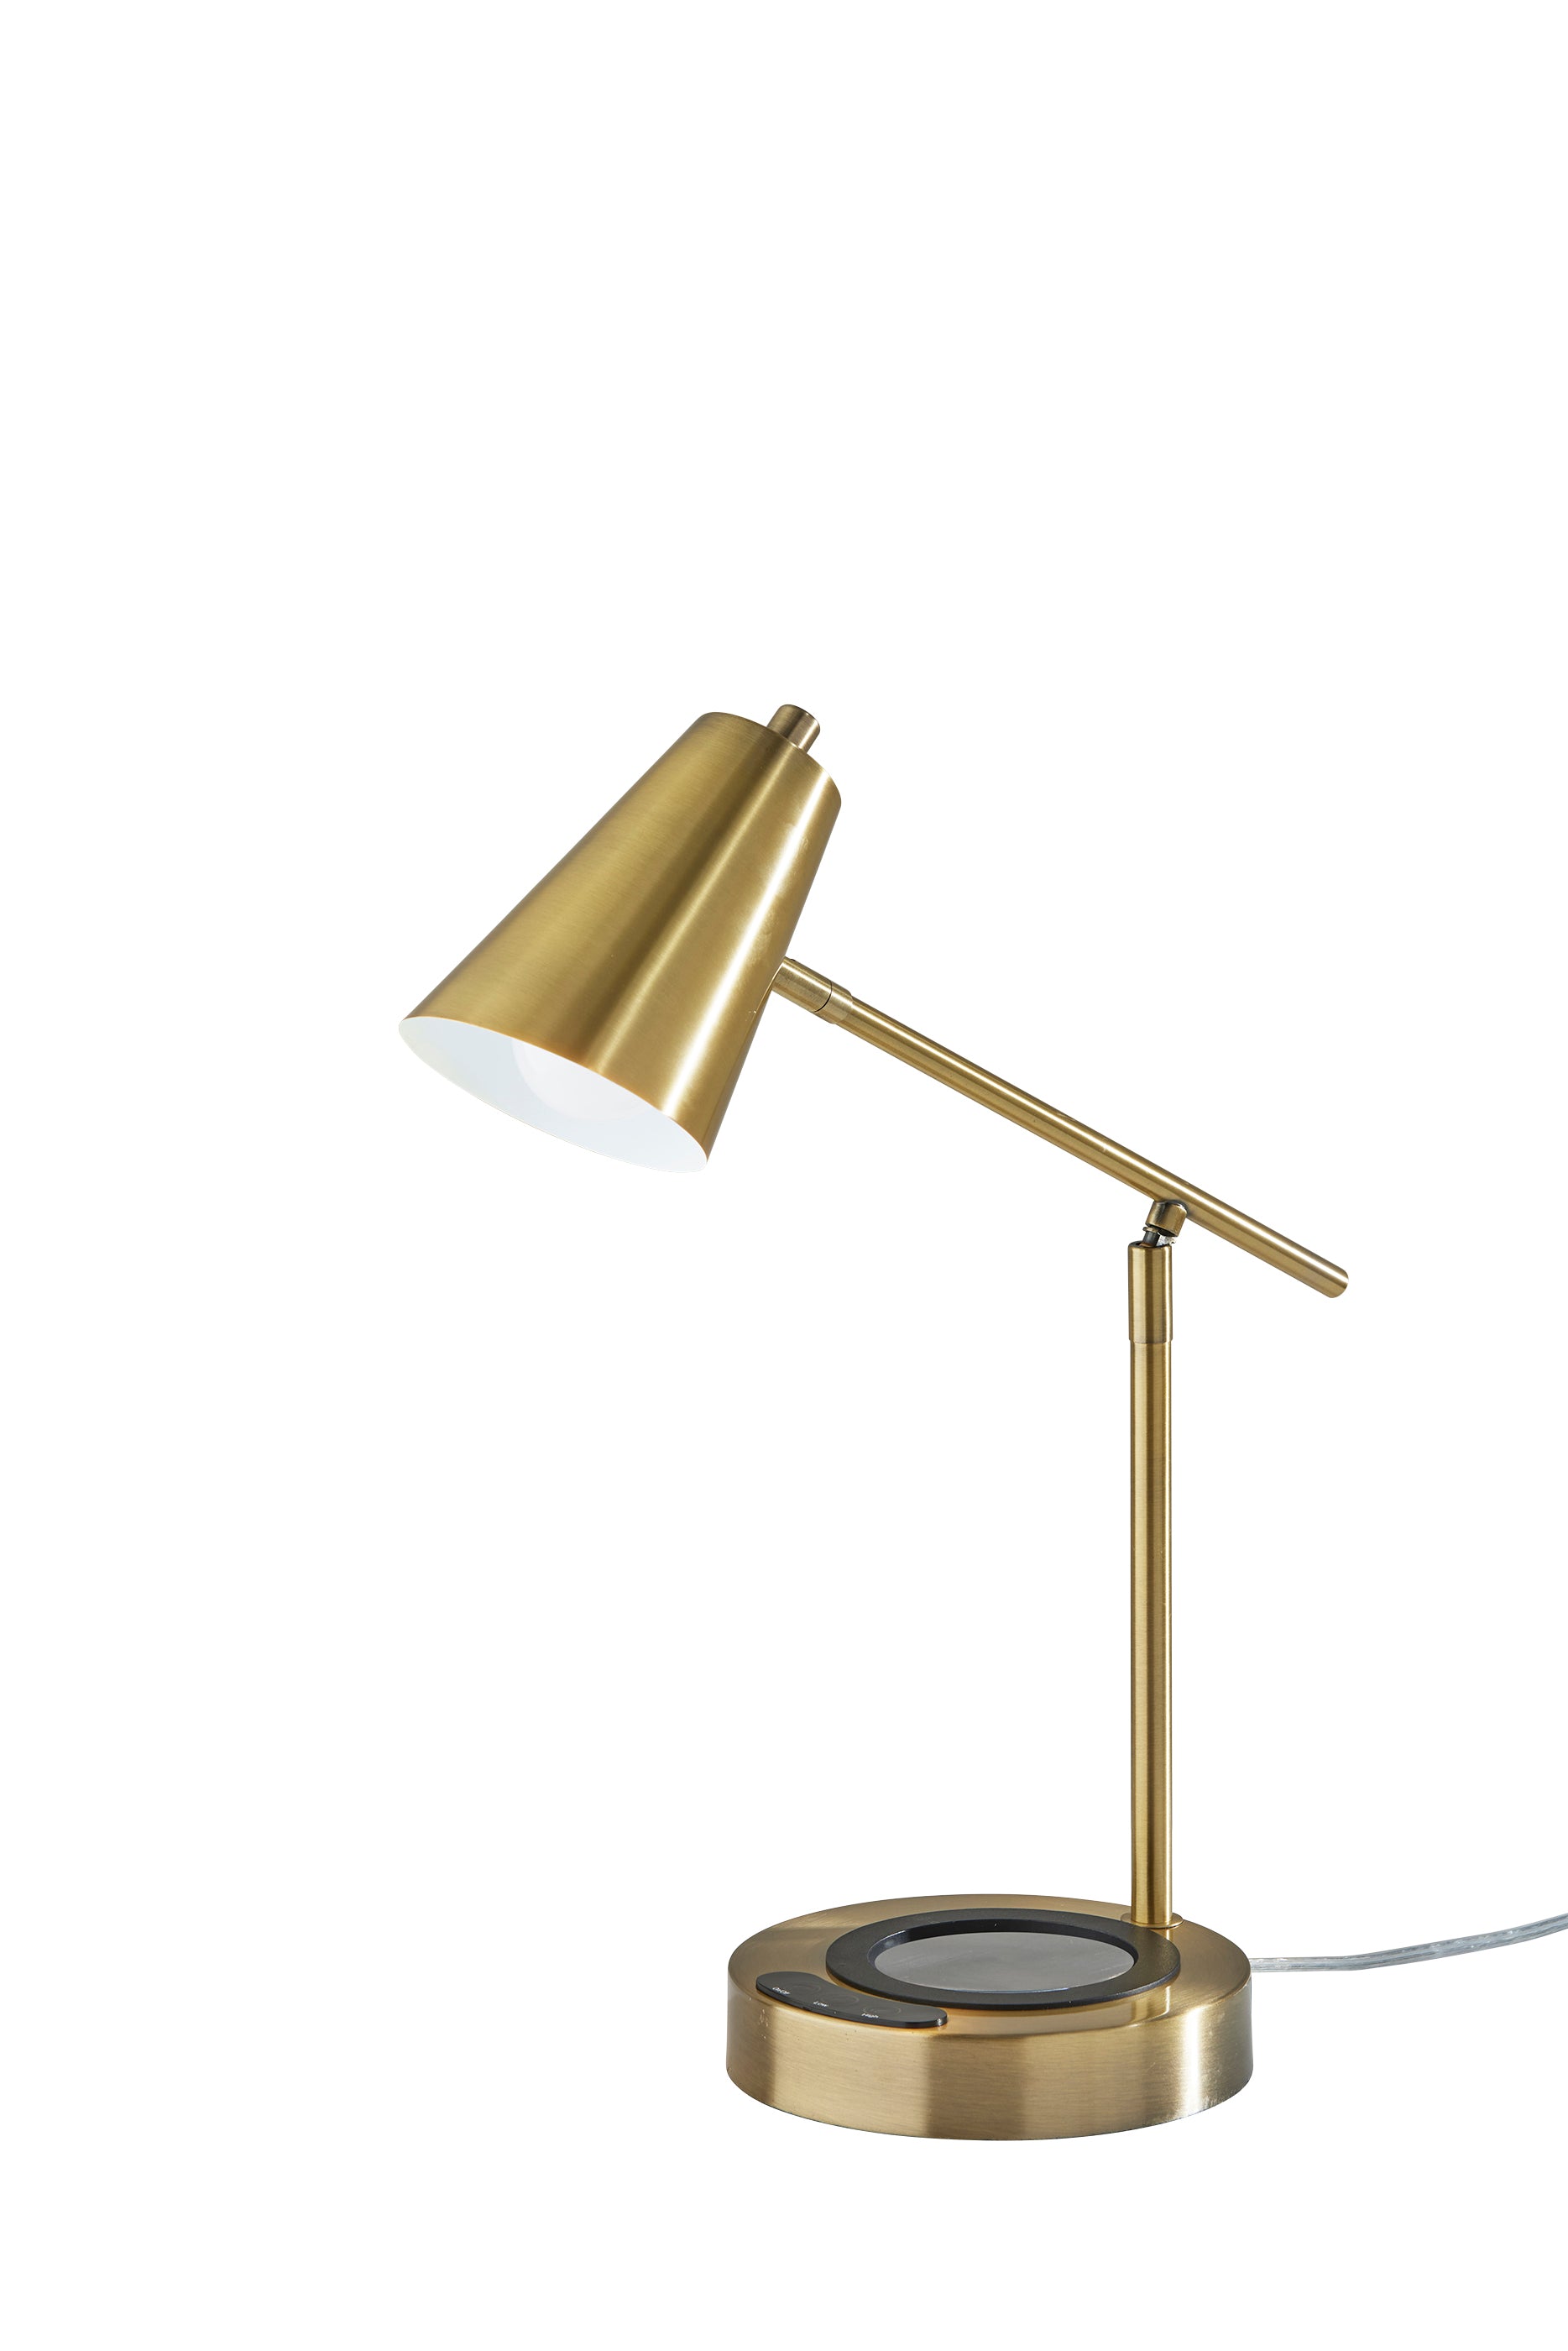 CUP WARMING Table lamp Gold - SL3729-21 | ADESSO